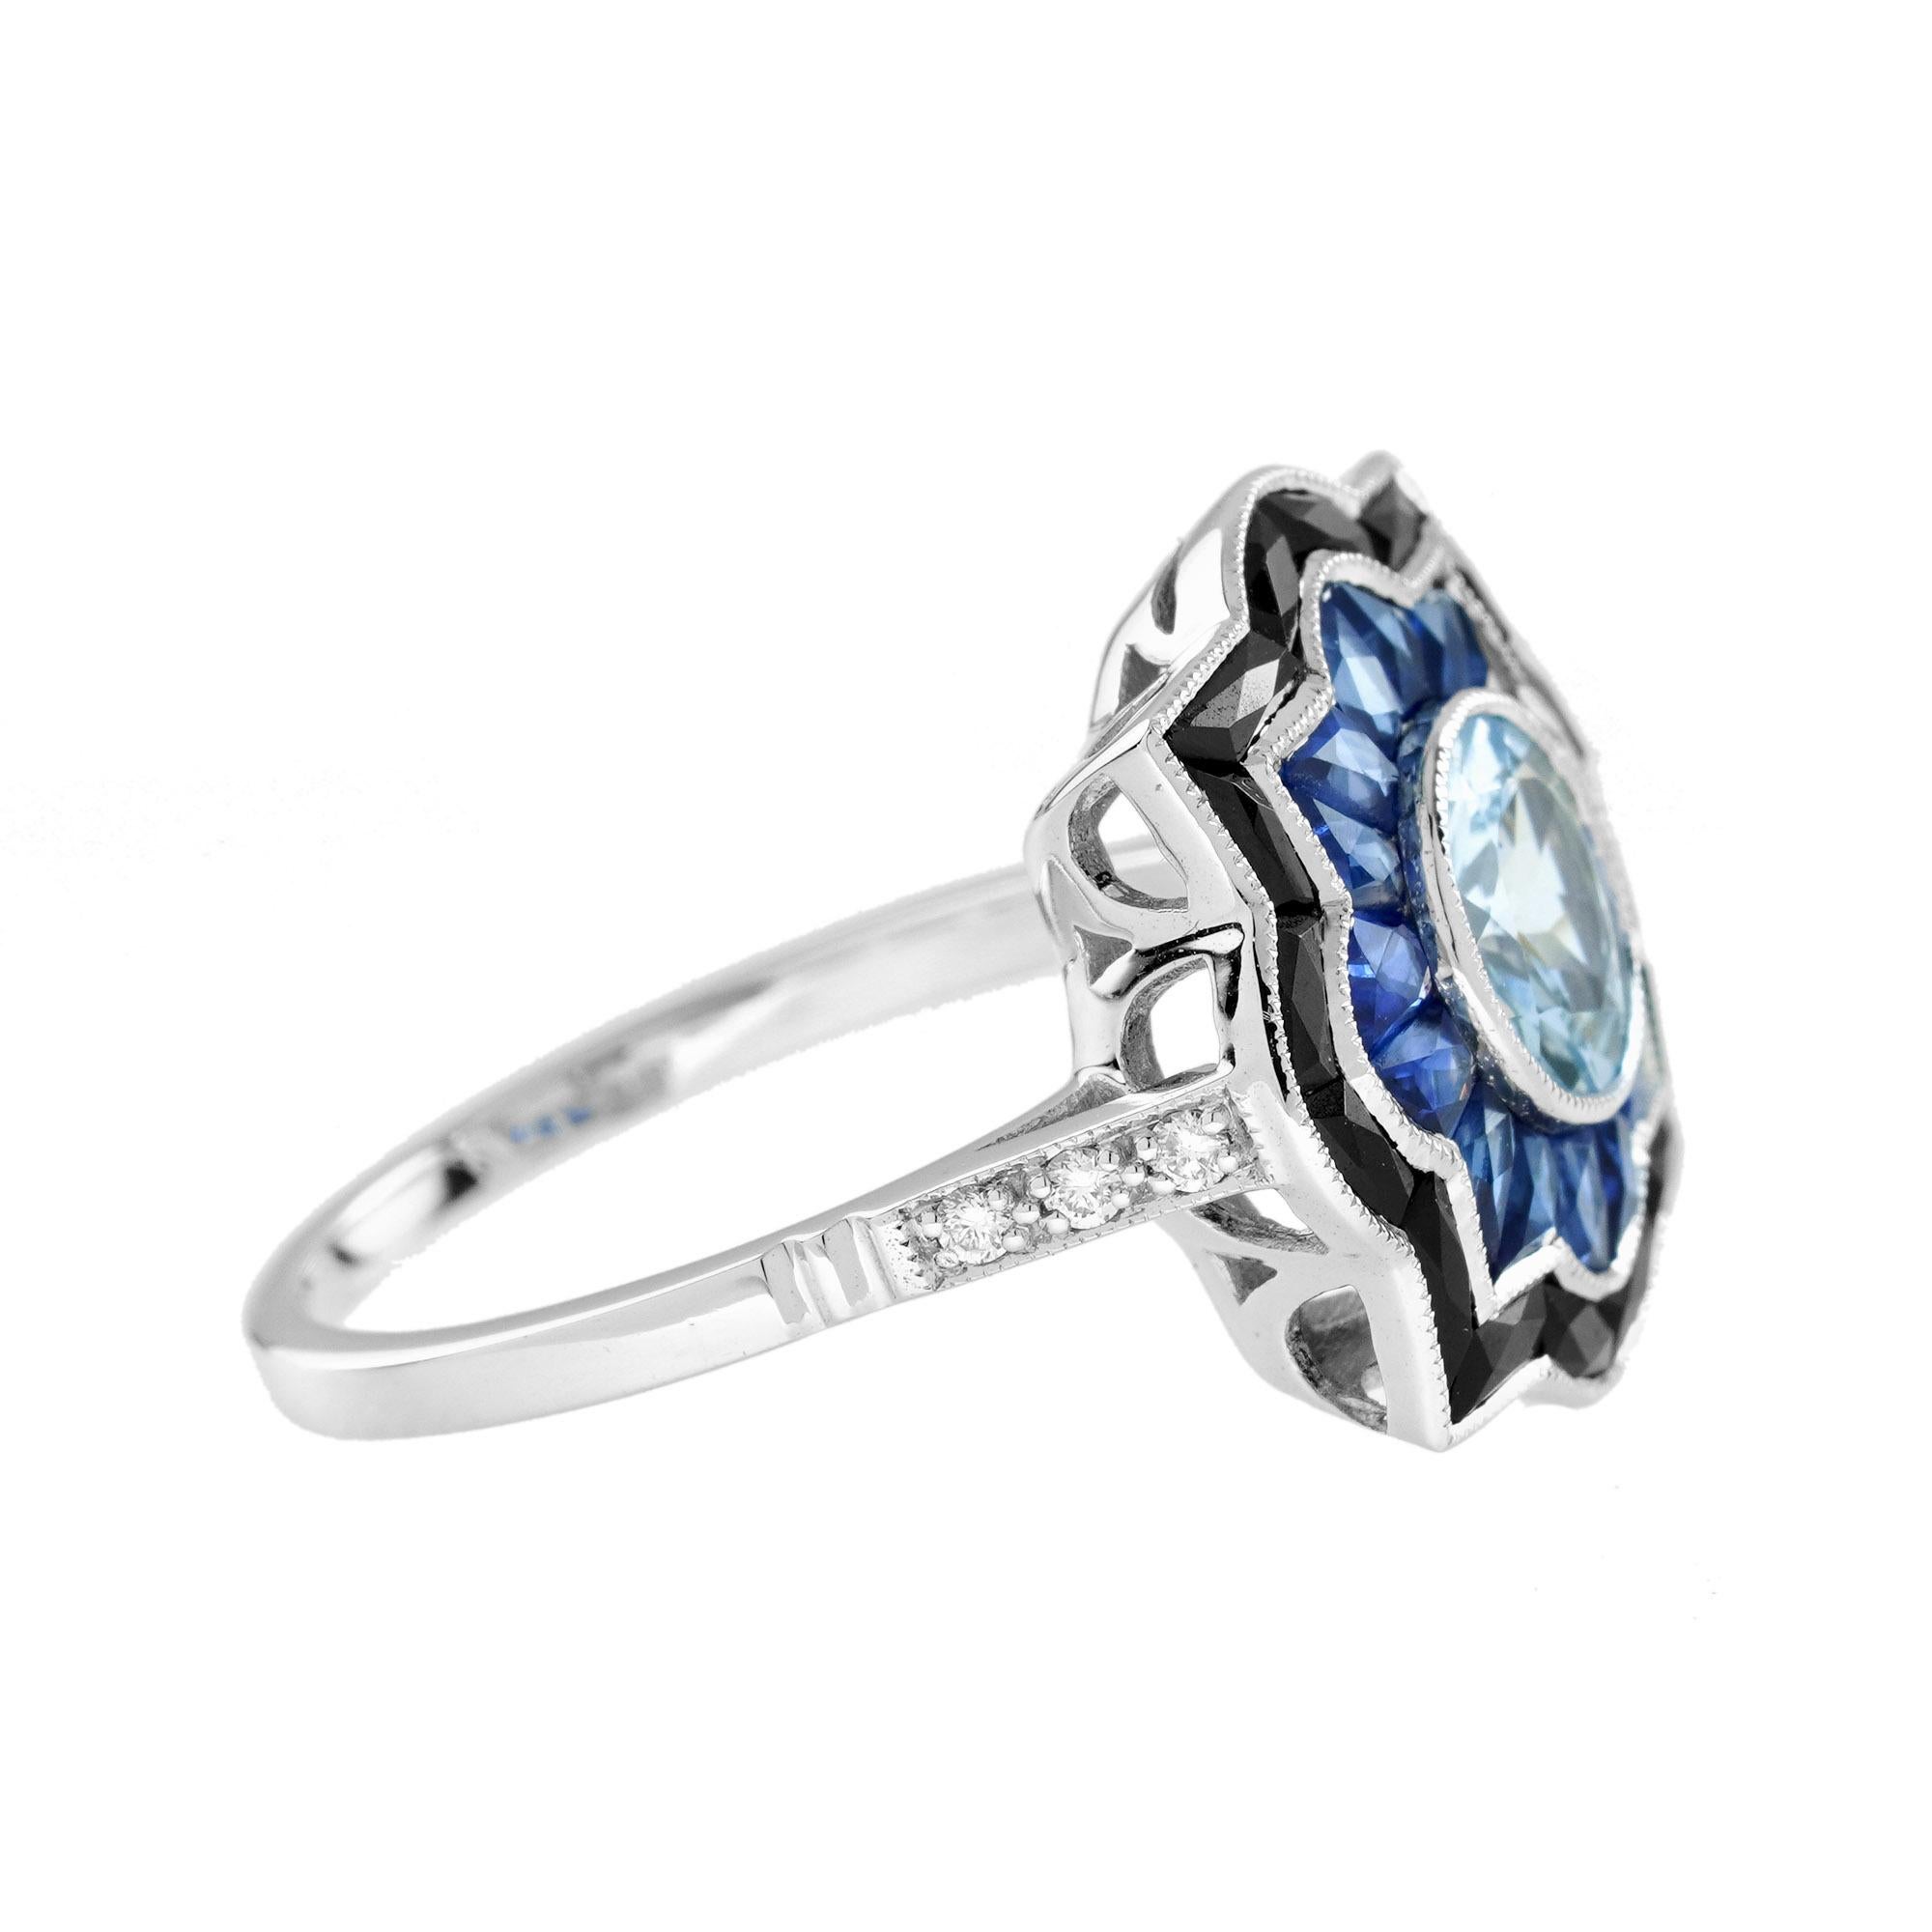 For Sale:  Aquamarine Sapphire Onyx Art Deco Style Target Engagement Ring in 18K White Gold 5